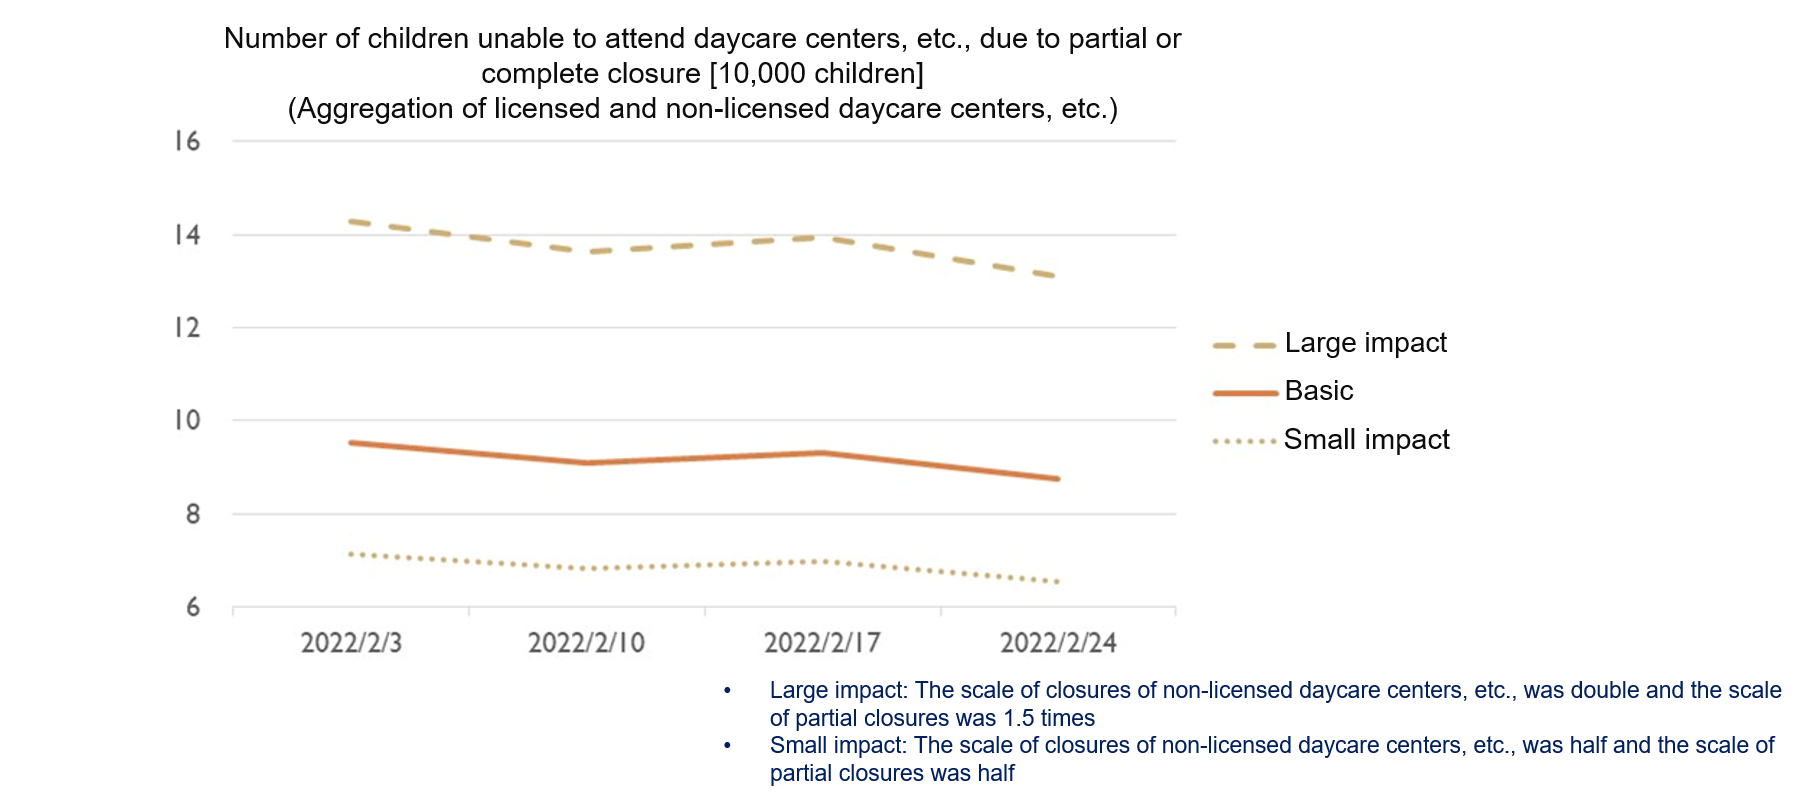 Number of Children Unable to Attend Daycare Centers, etc., Due to their Closure (Estimate)